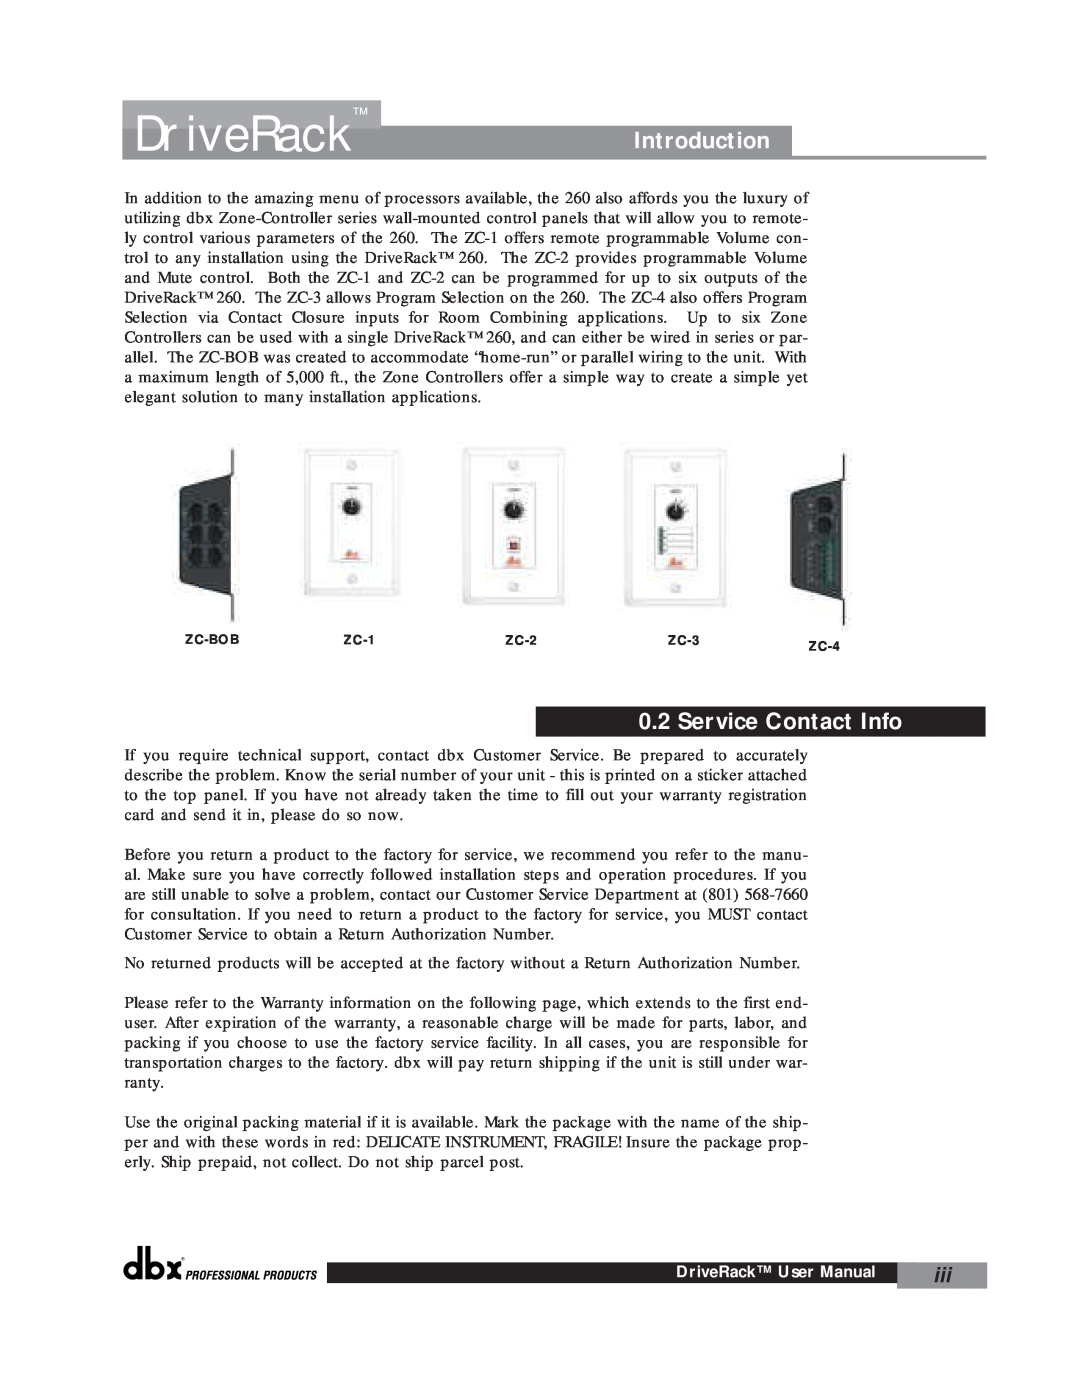 dbx Pro 260 user manual DriveRackIntroduction, Service Contact Info 